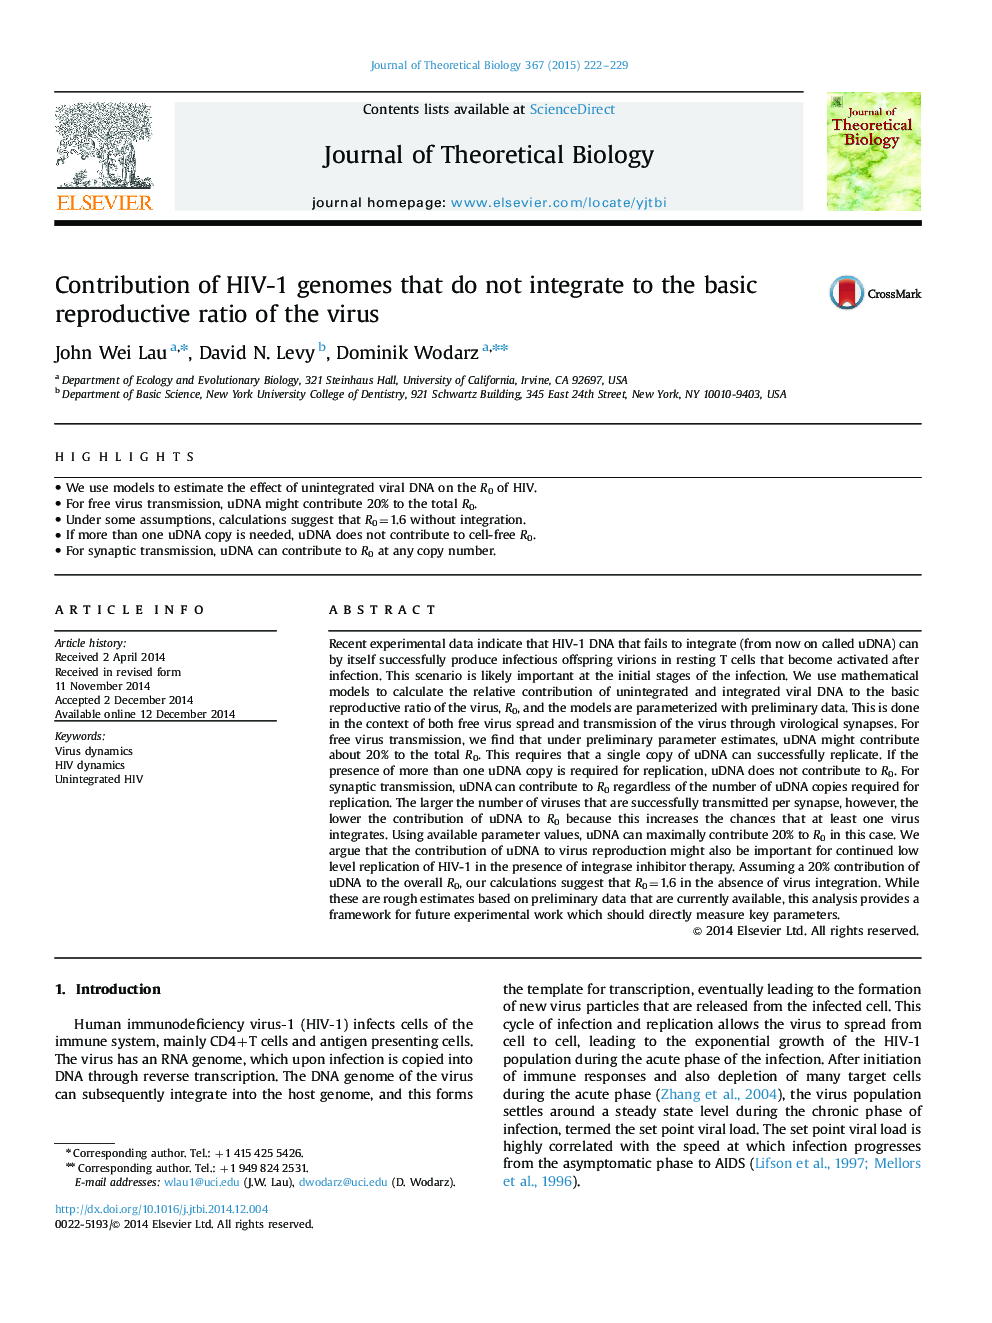 Contribution of HIV-1 genomes that do not integrate to the basic reproductive ratio of the virus